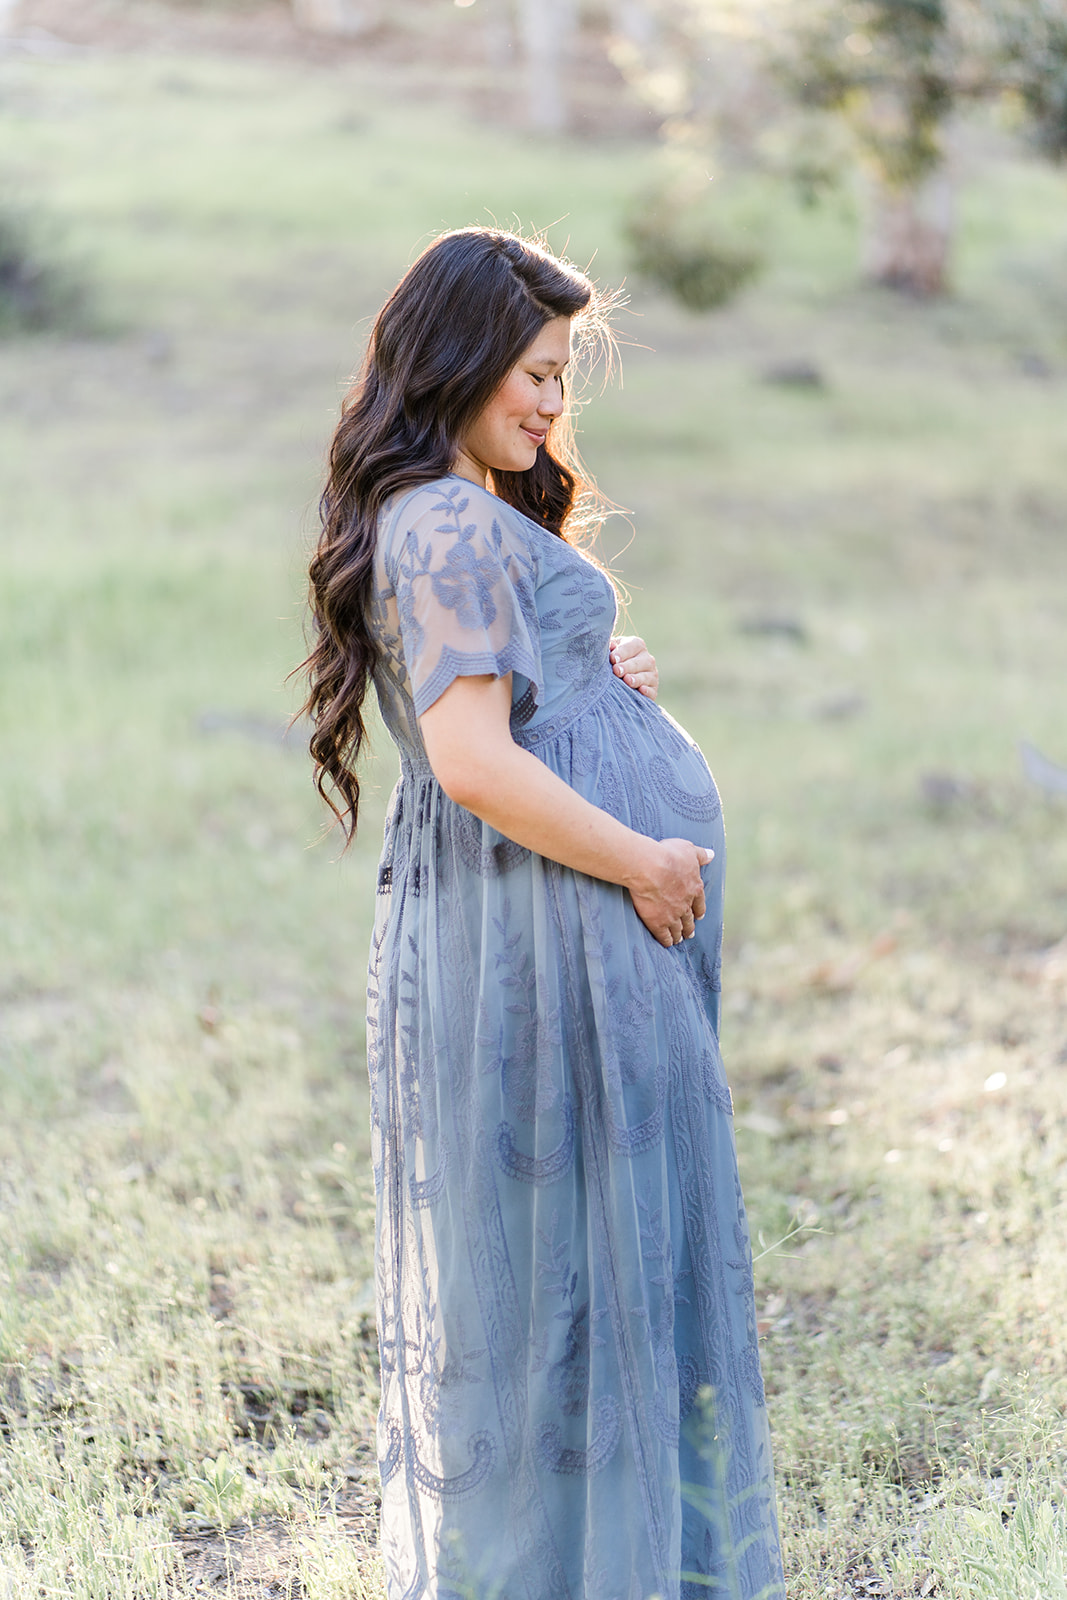 A mom to be in a blue lace dress stands in a field at sunset after visiting a Hoag OBGYN